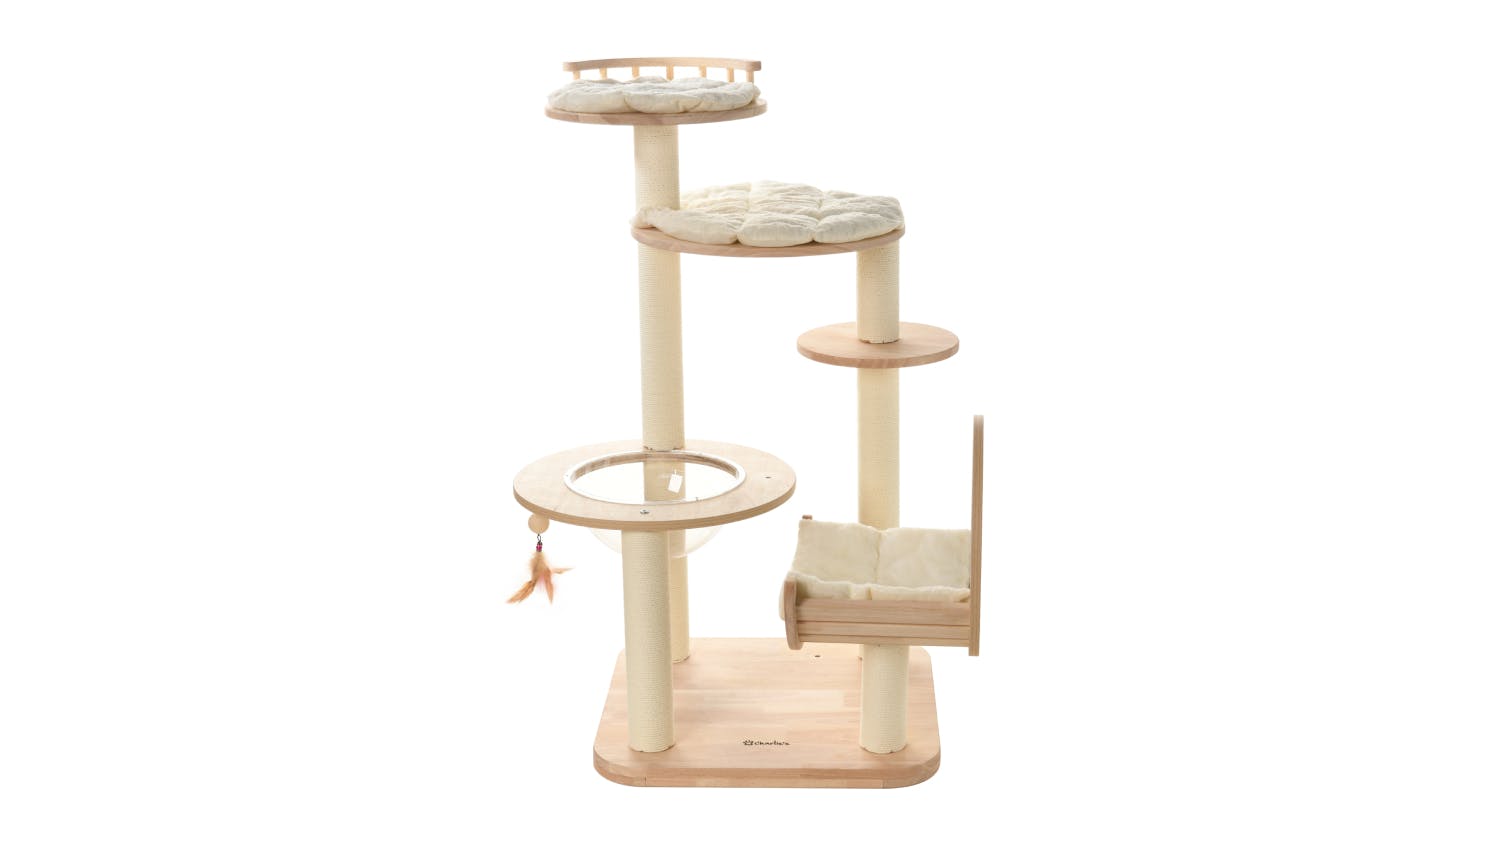 Charlie's "Galaxy" Wooden Five Tier Cat Scratcher & Tree with Cubby, Bed 146cm - Cream